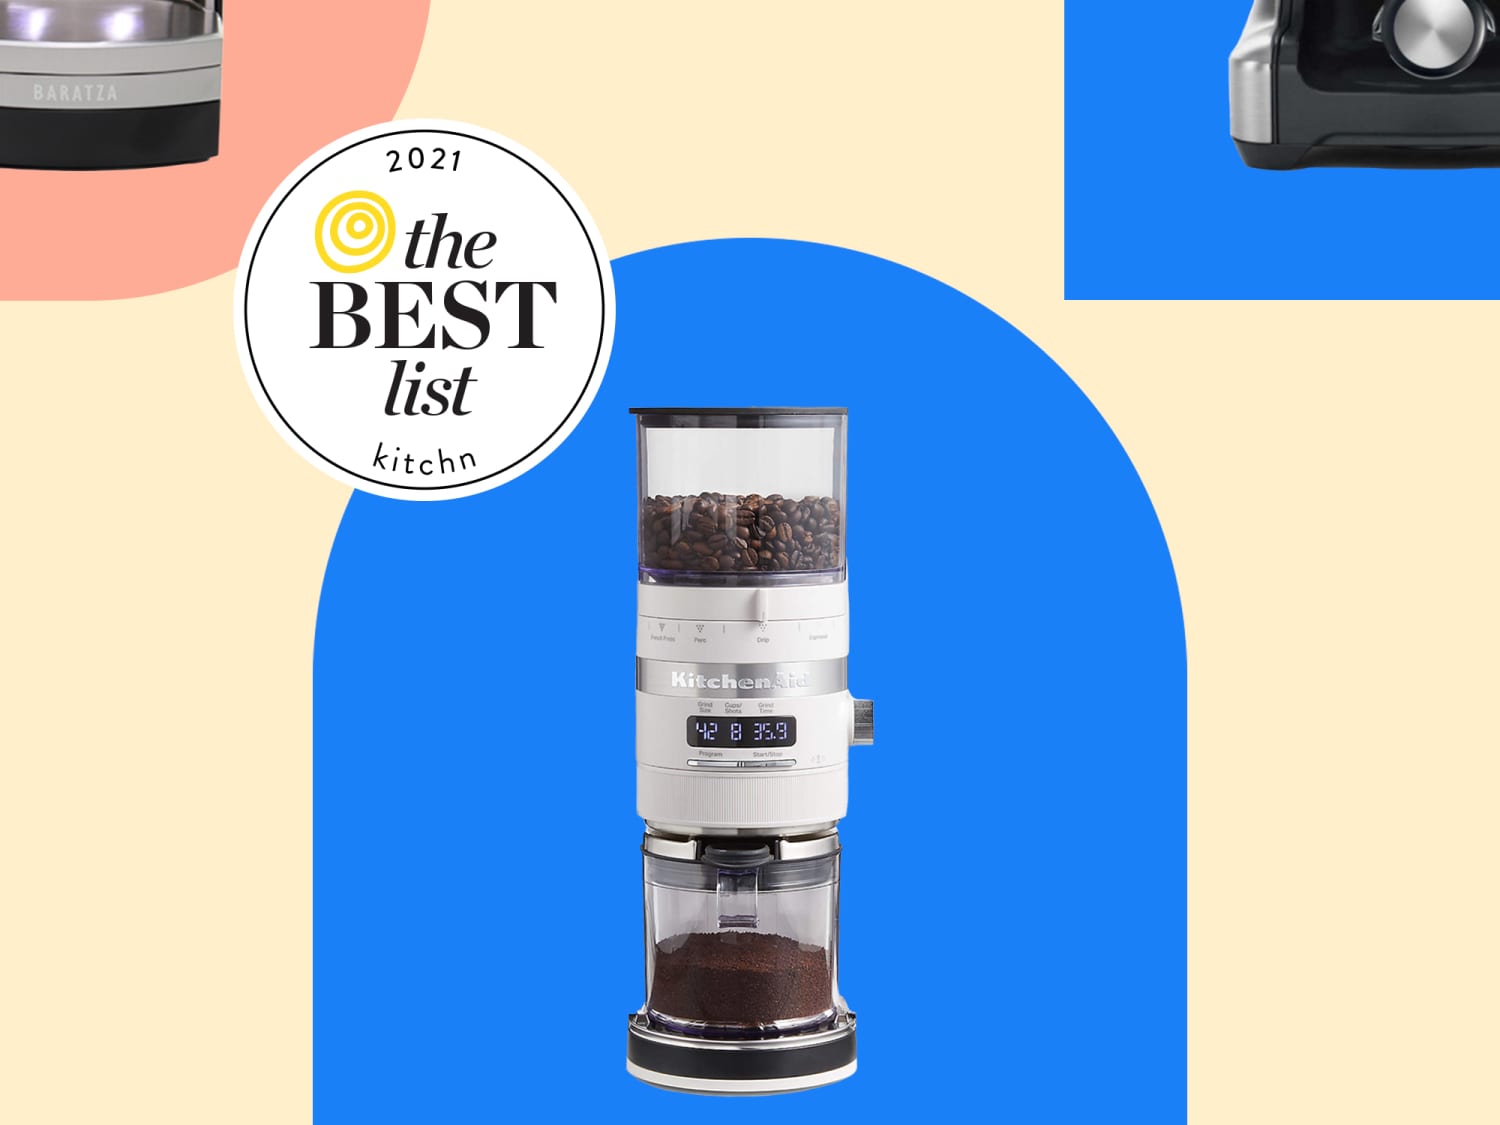 Best coffee grinders of 2023, tried and tested